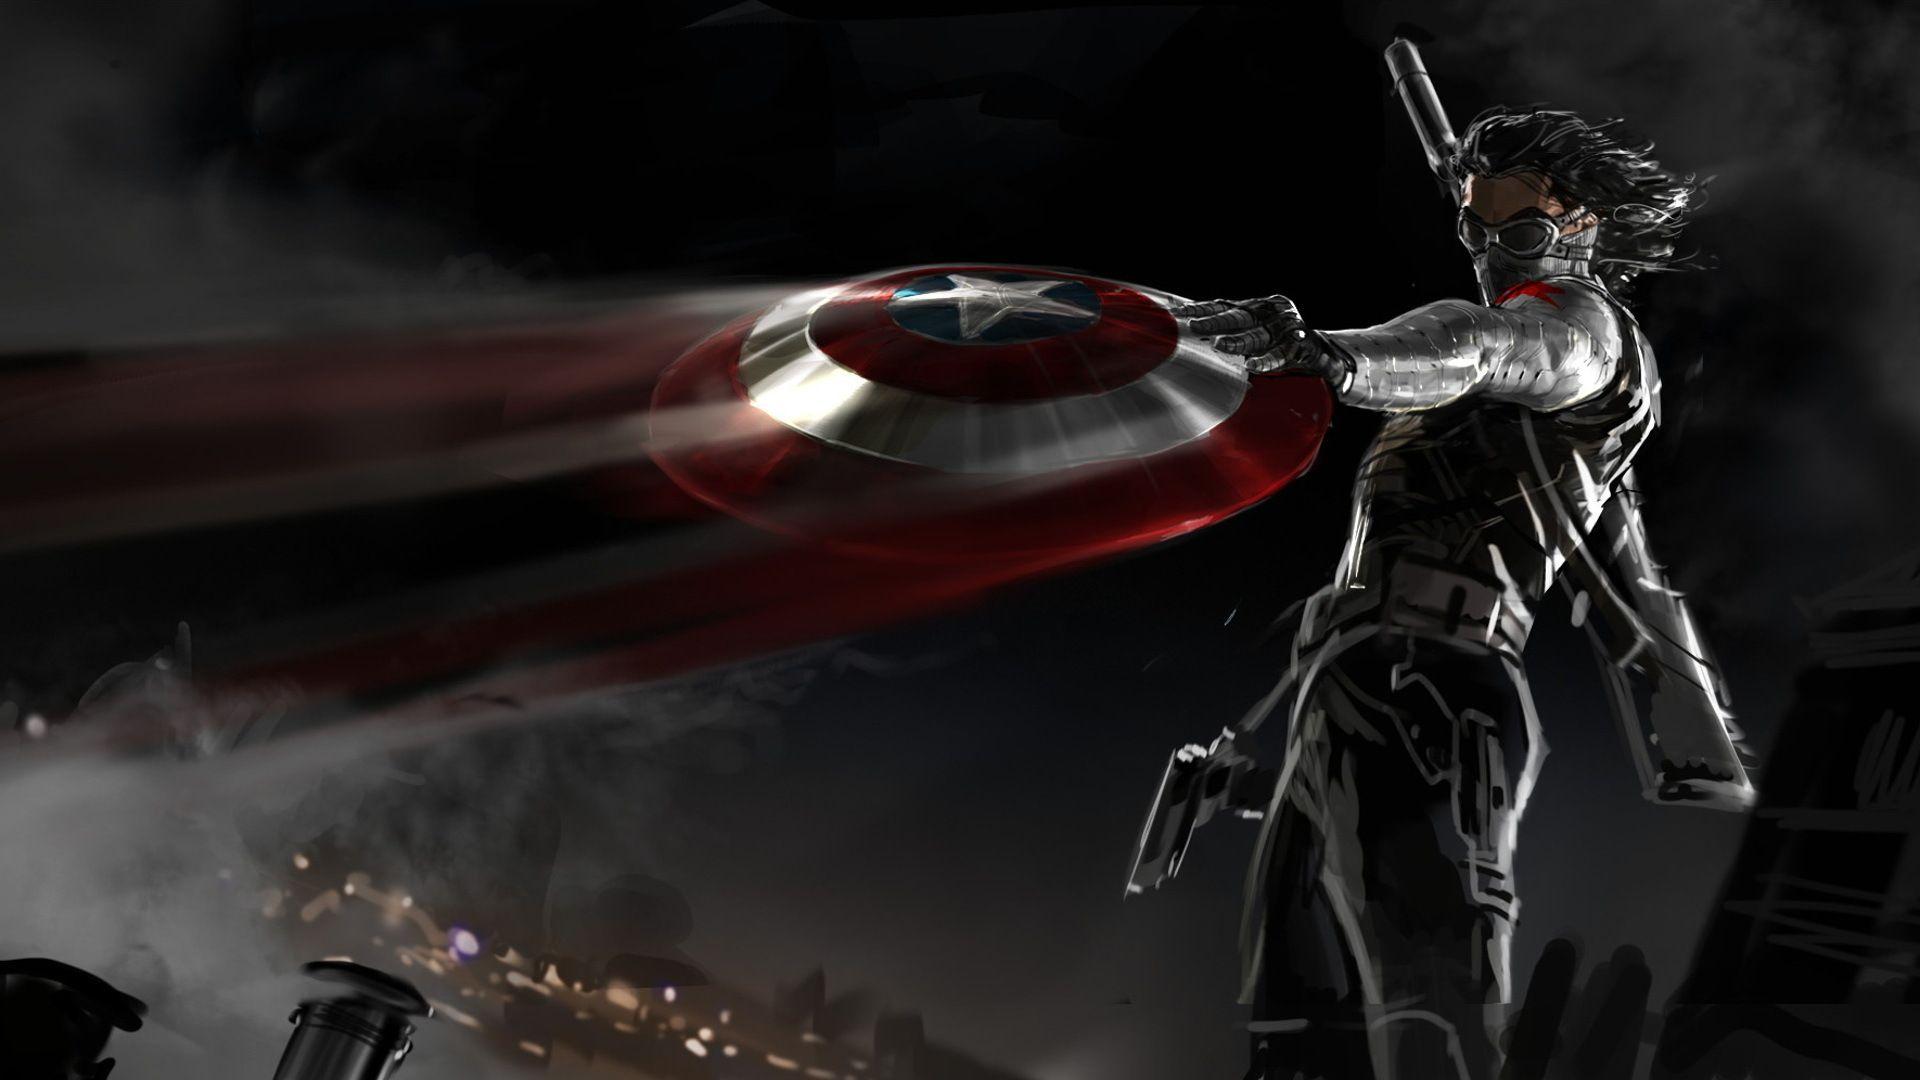 Bucky as The Winter Soldier Wallpaper. Captain america